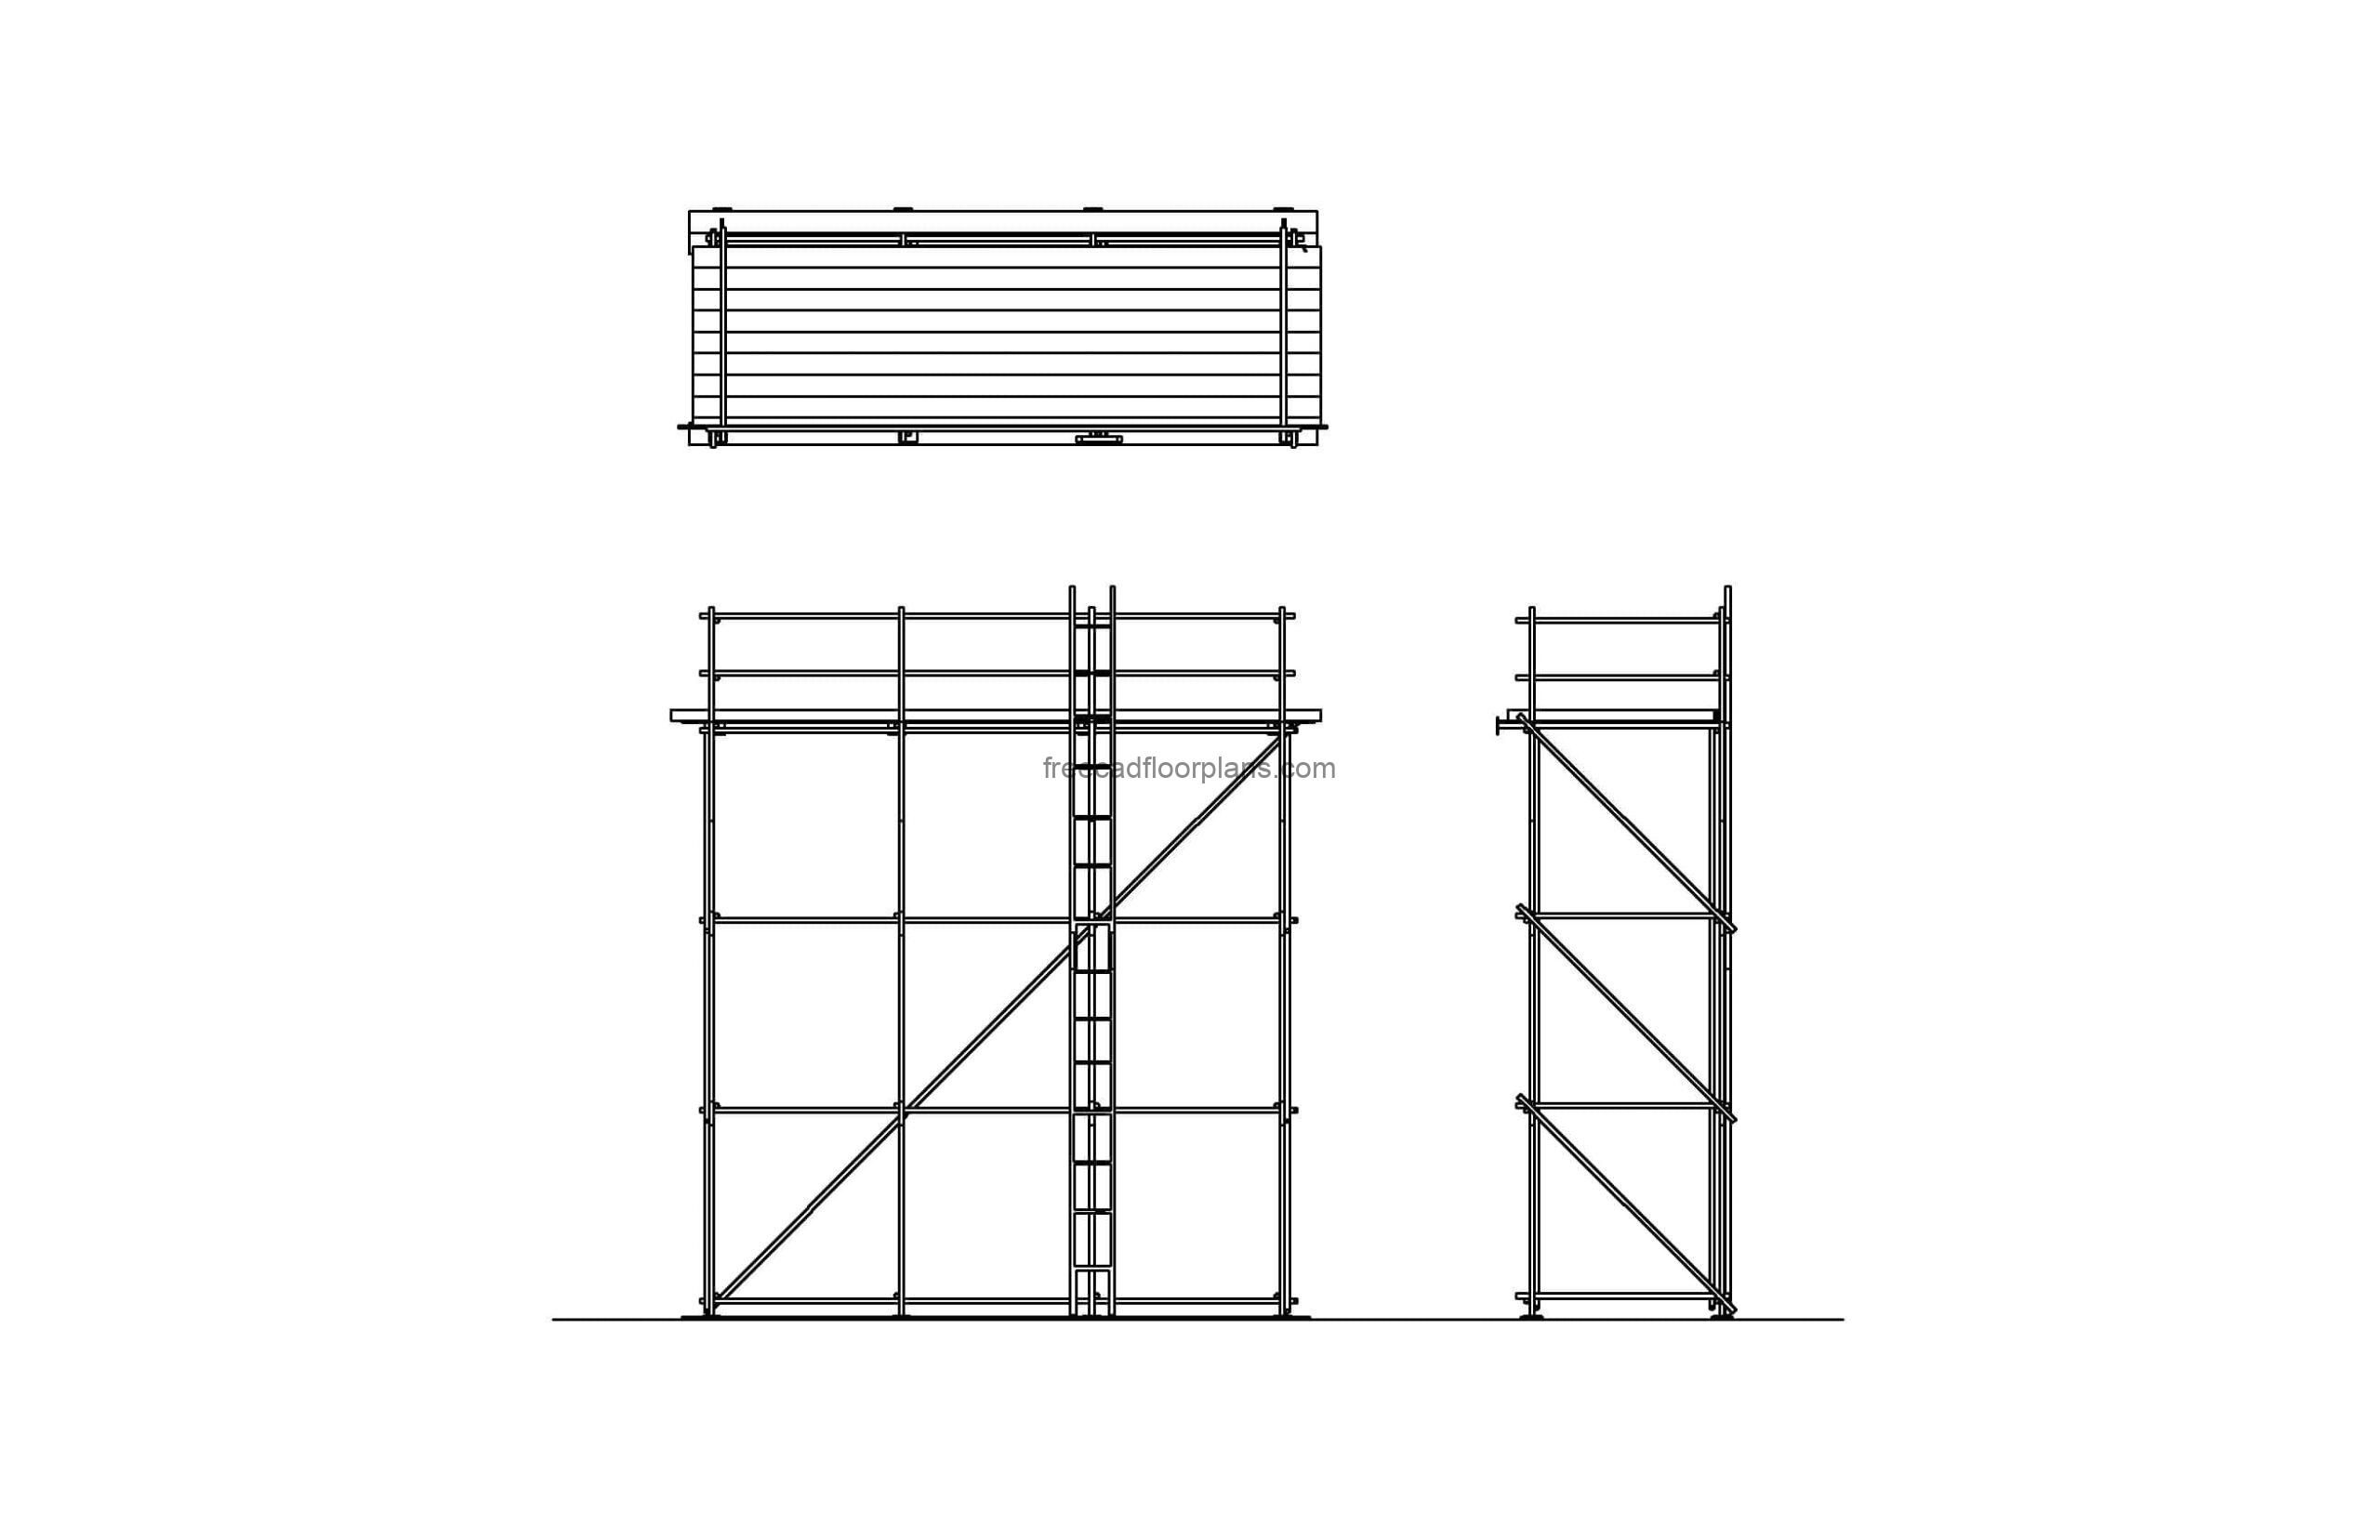 Scaffolding autocad drawing plan and elevation 2d views, dwg file for free download